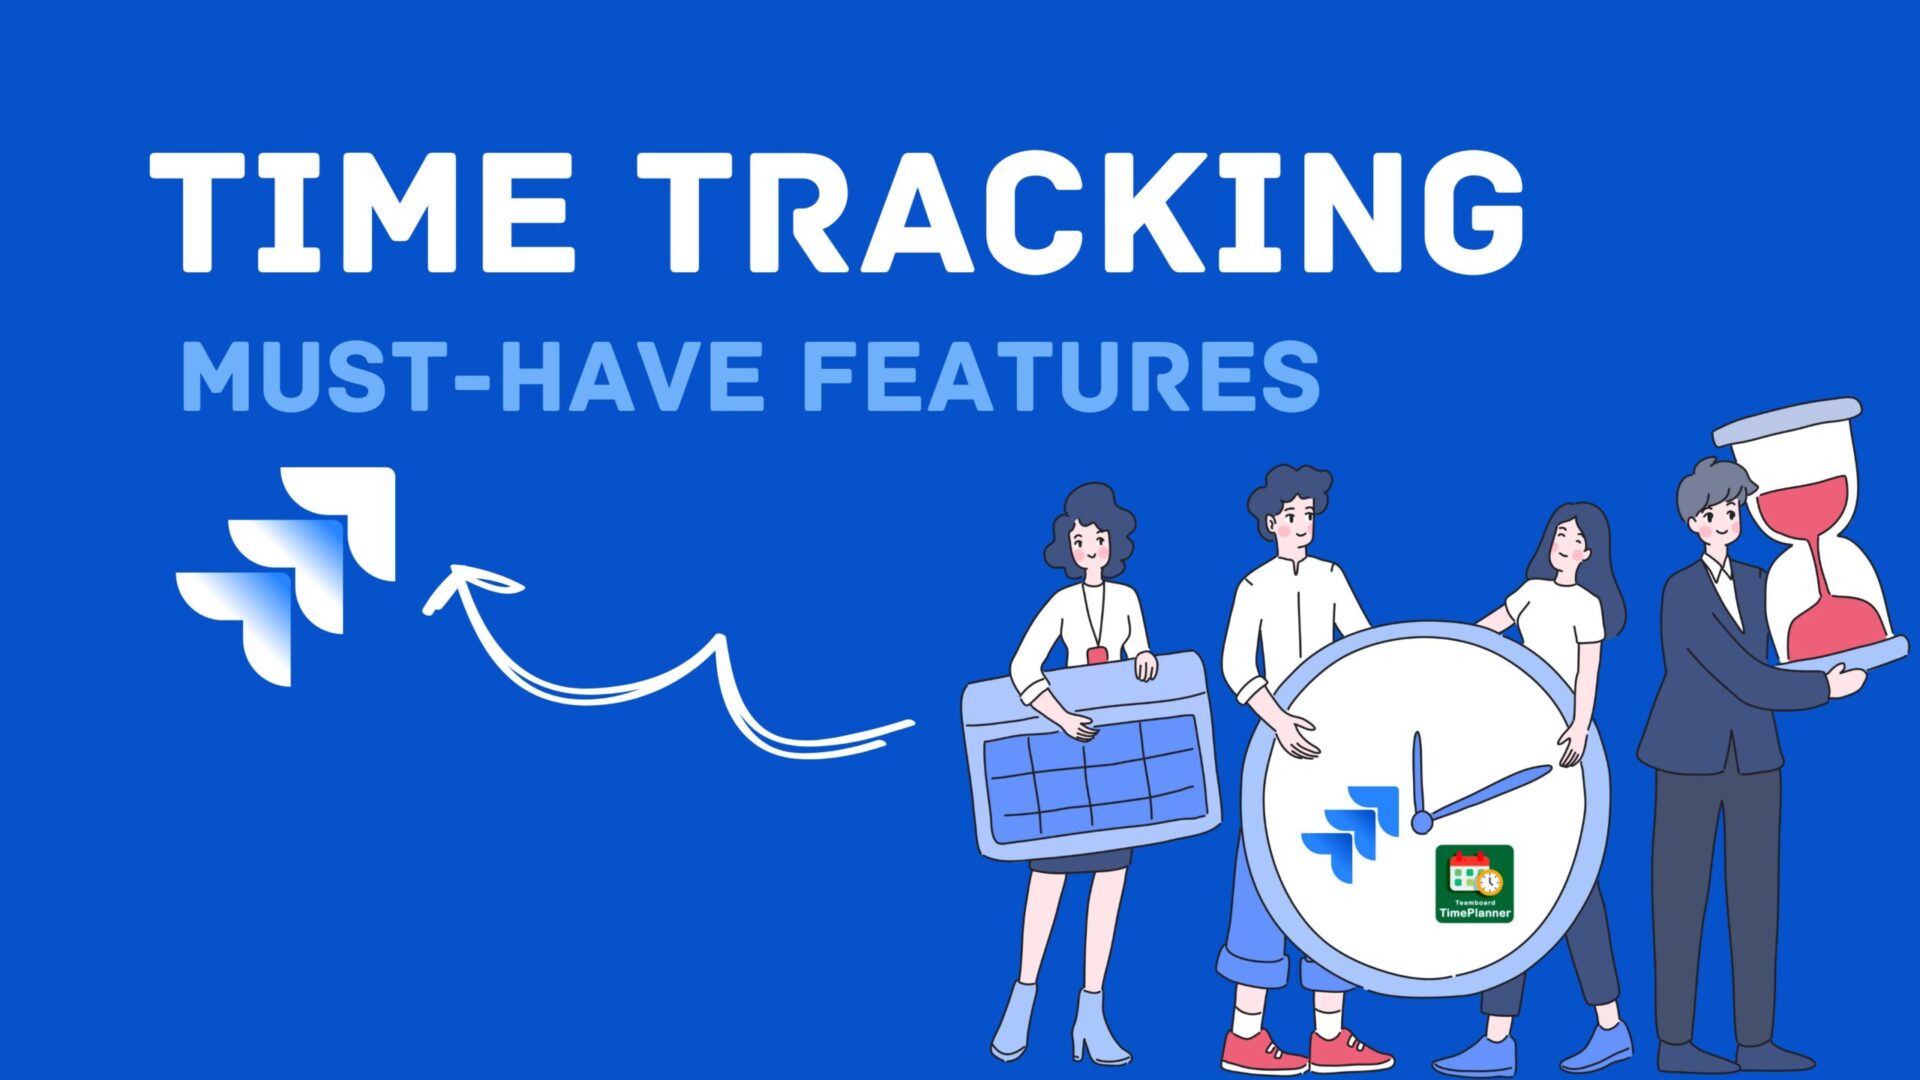 Jira time tracking to keep your team on track